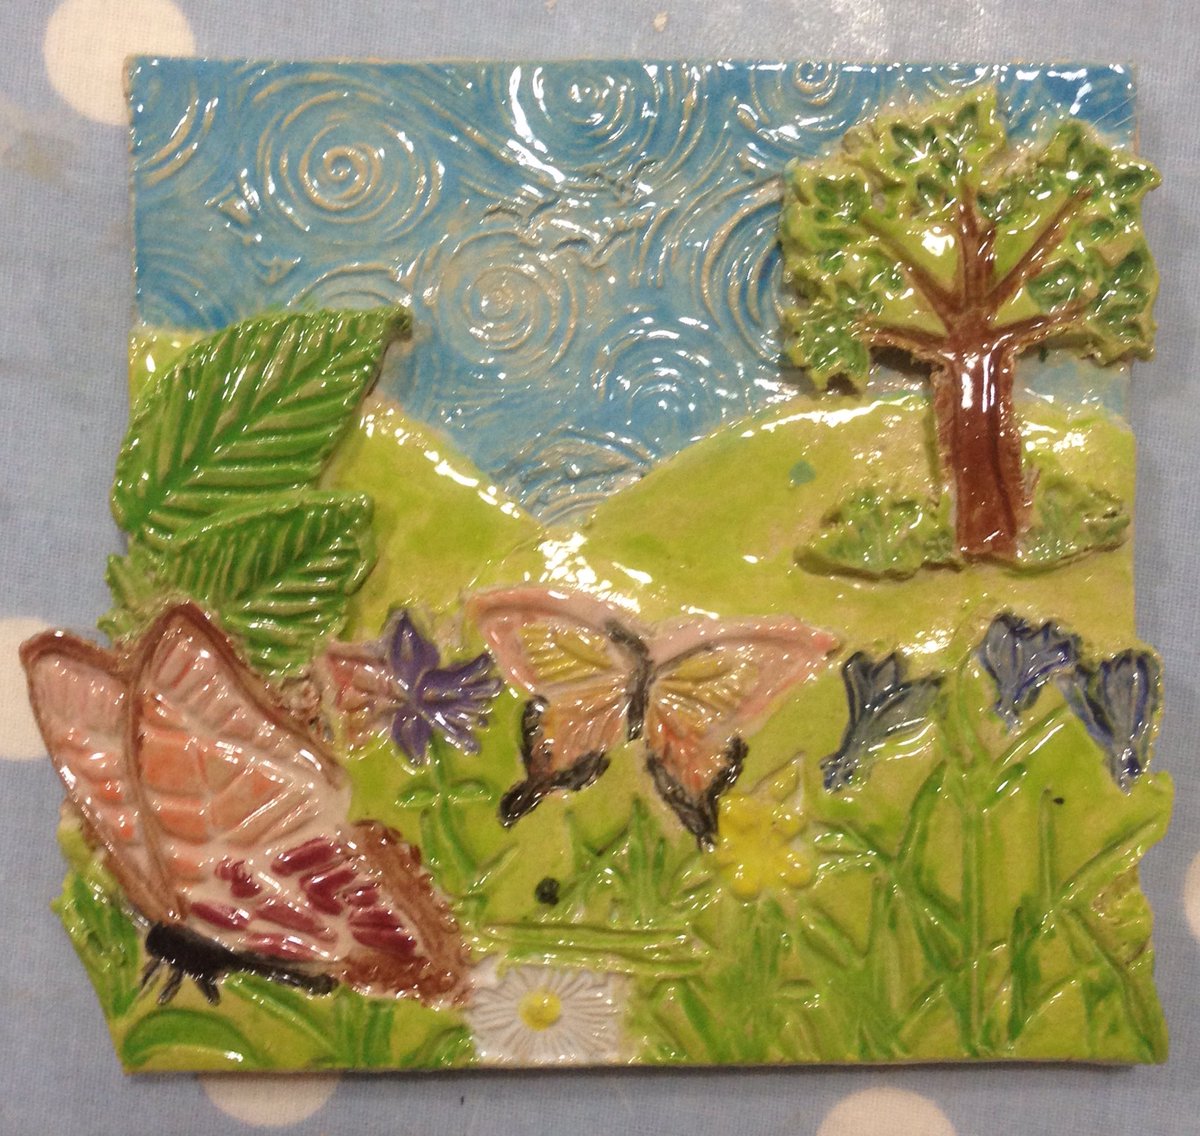 Anne's tile has come out a treat! #pottery #claycourse #redhouseglasscone #giftexperience